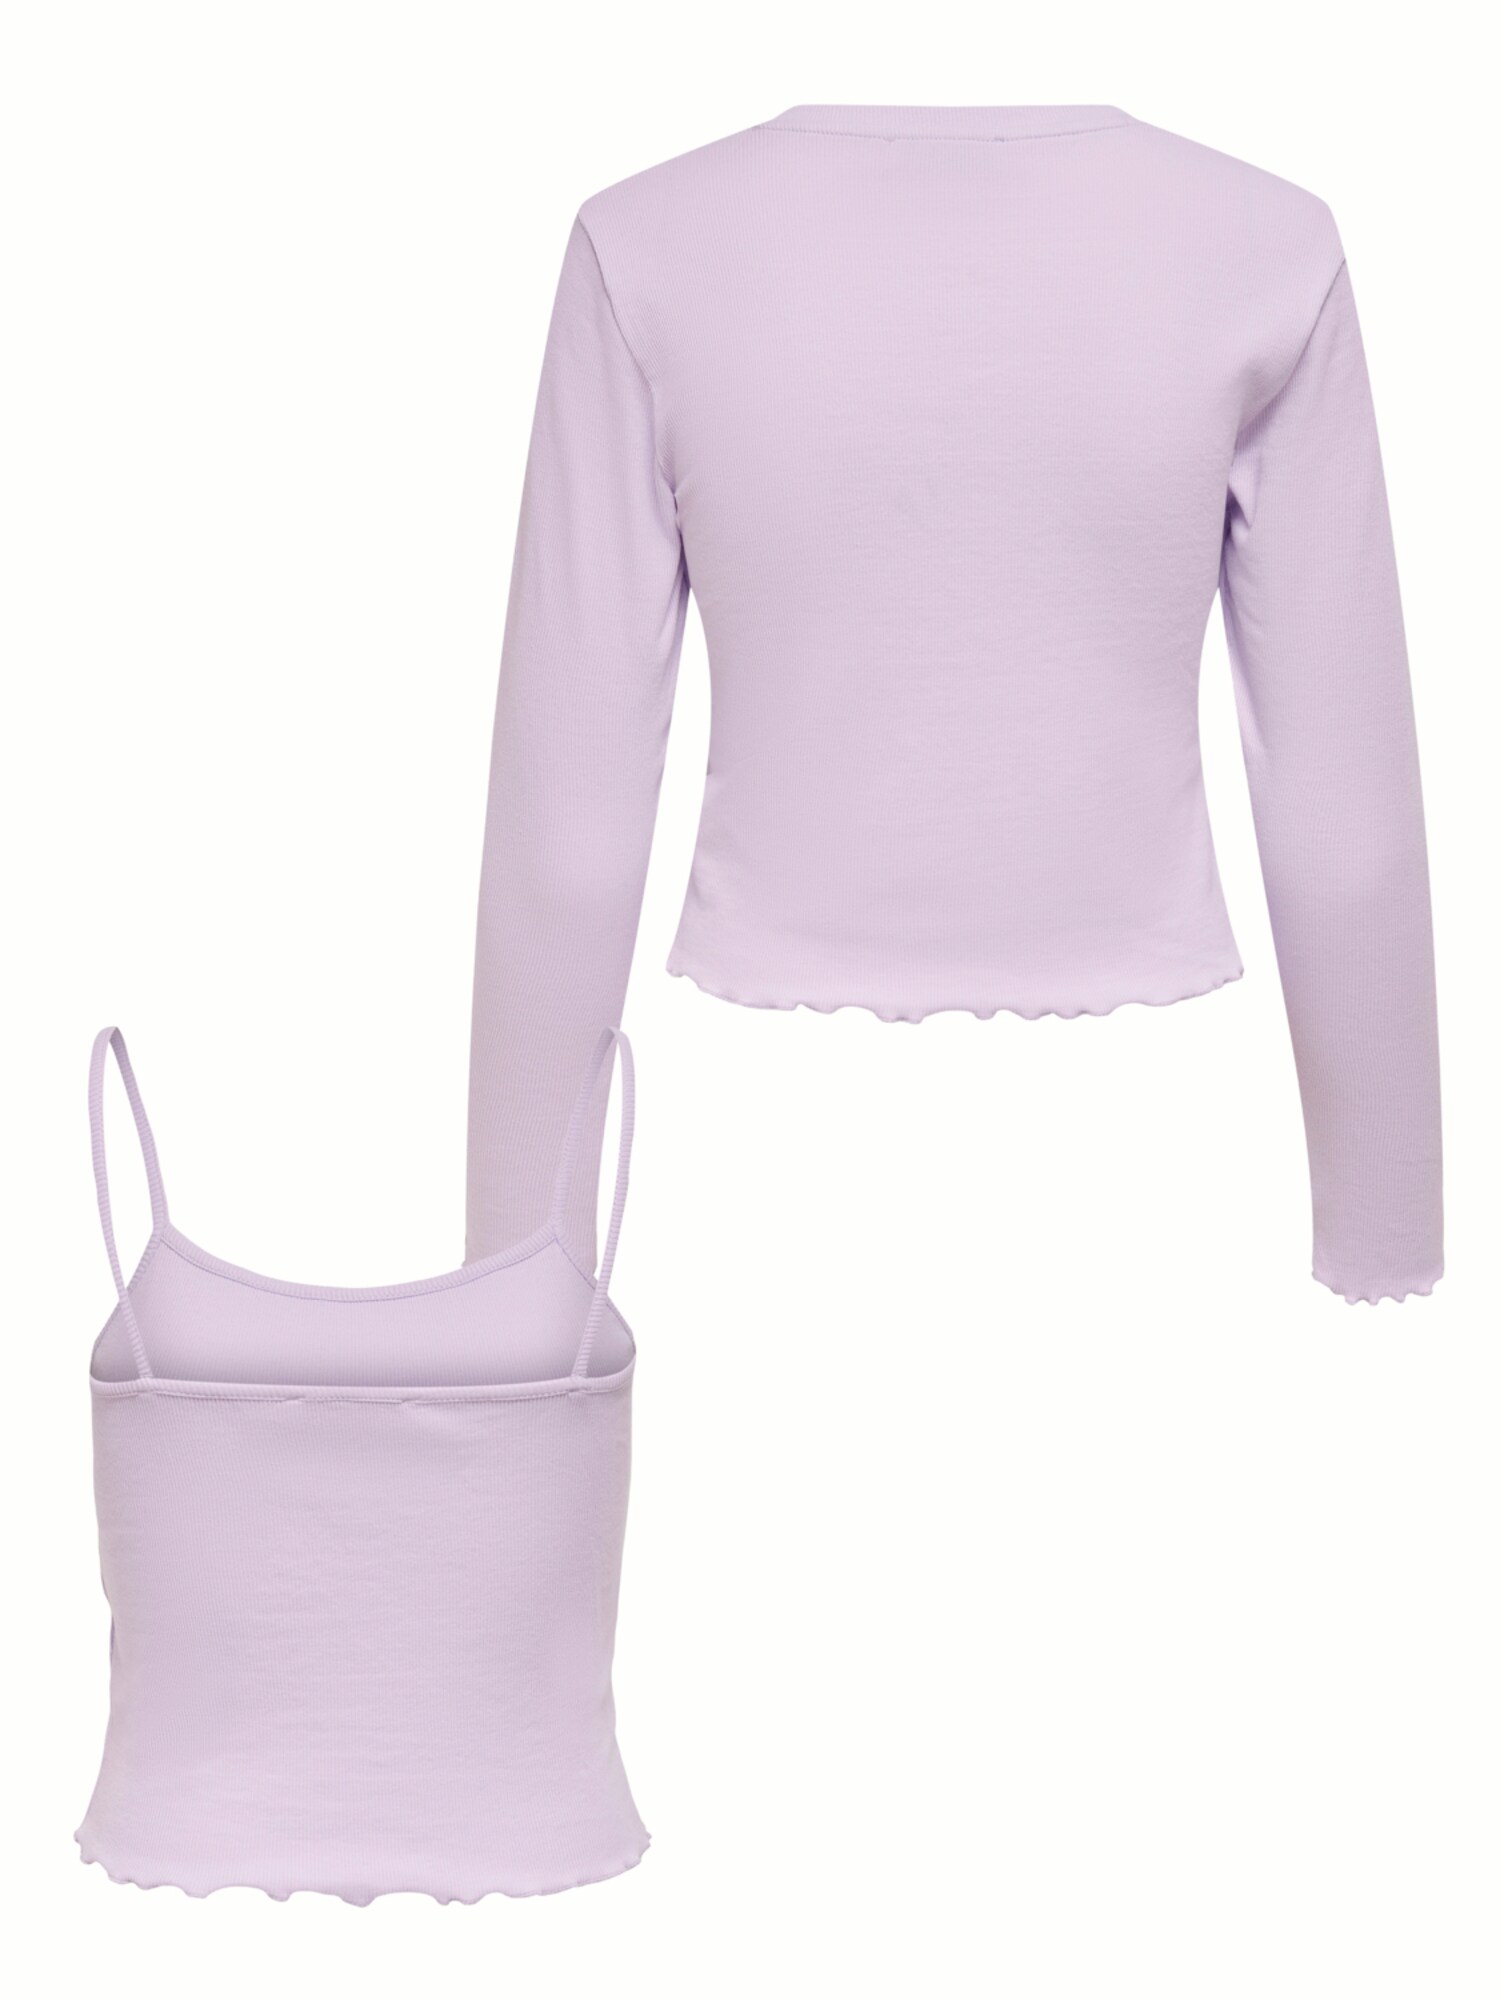 ONLY Top  light purple / lilac